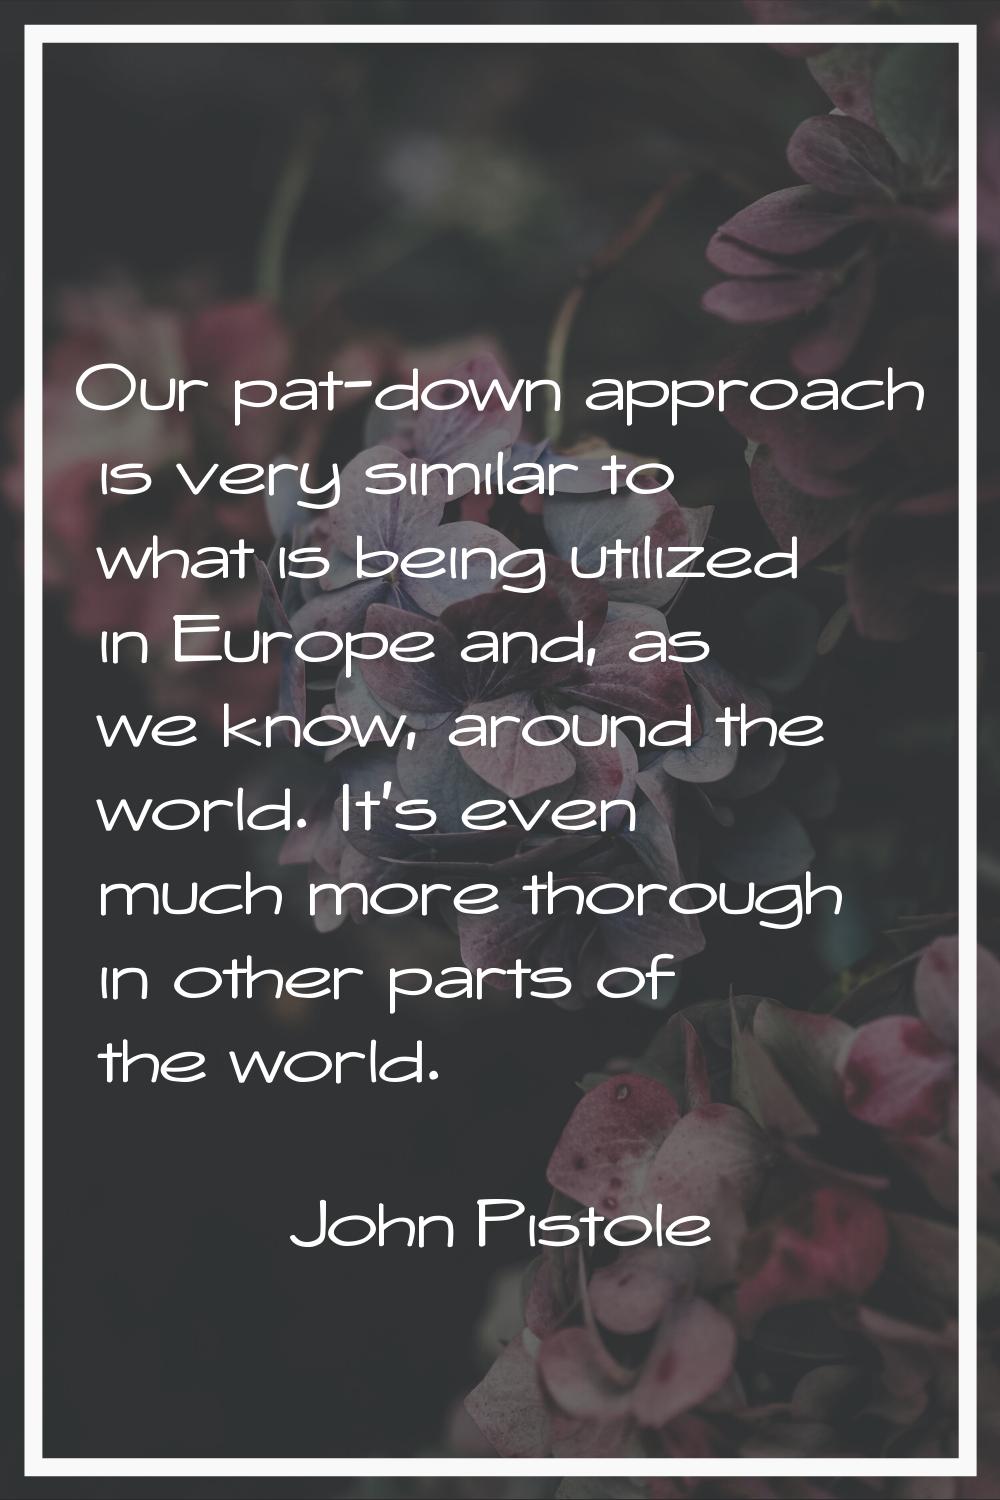 Our pat-down approach is very similar to what is being utilized in Europe and, as we know, around t